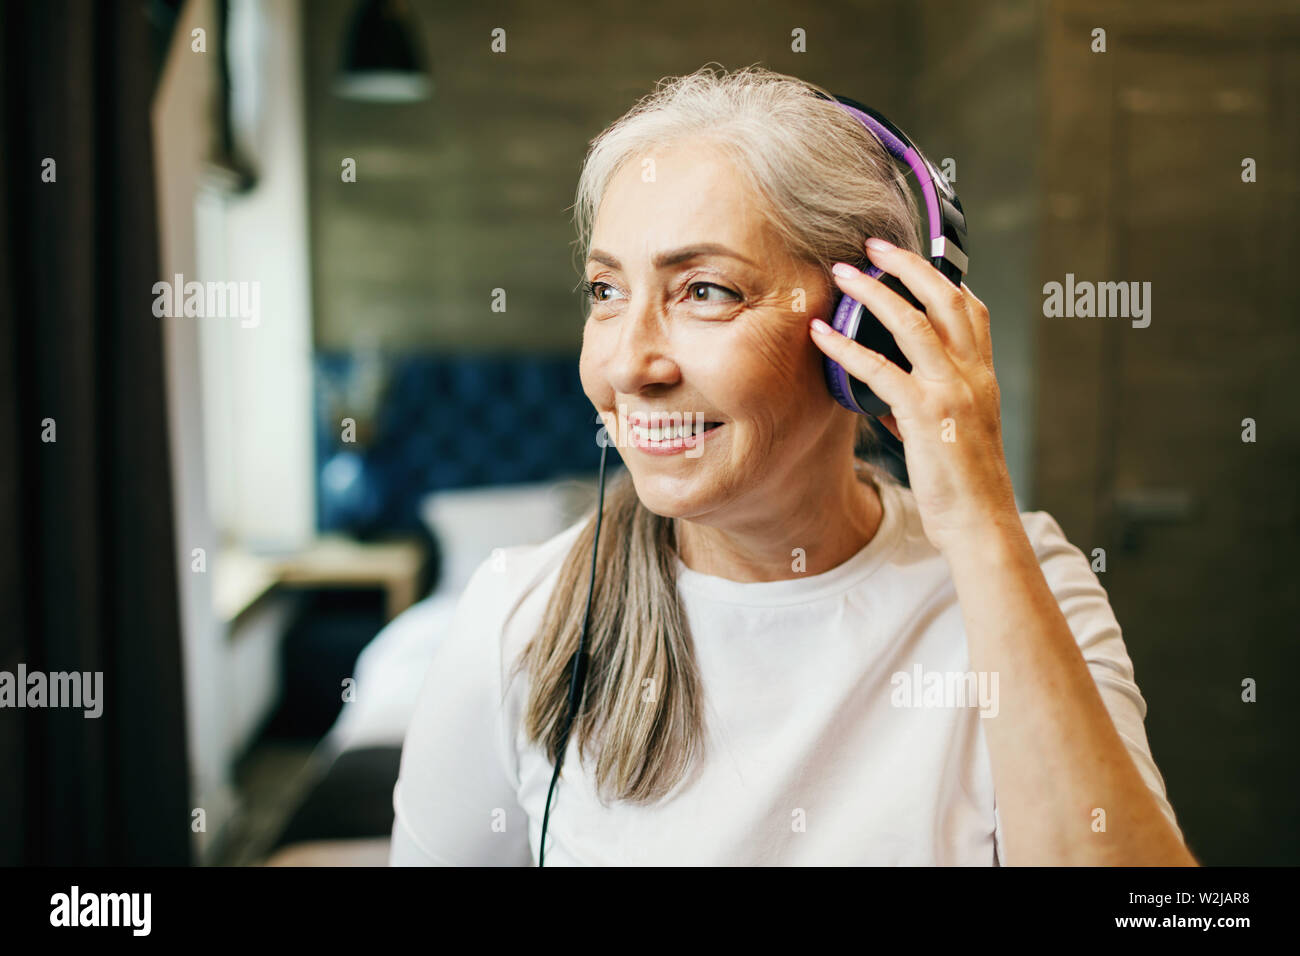 Grey haired senior woman wears headphones listening to the music, indoors home shot Stock Photo